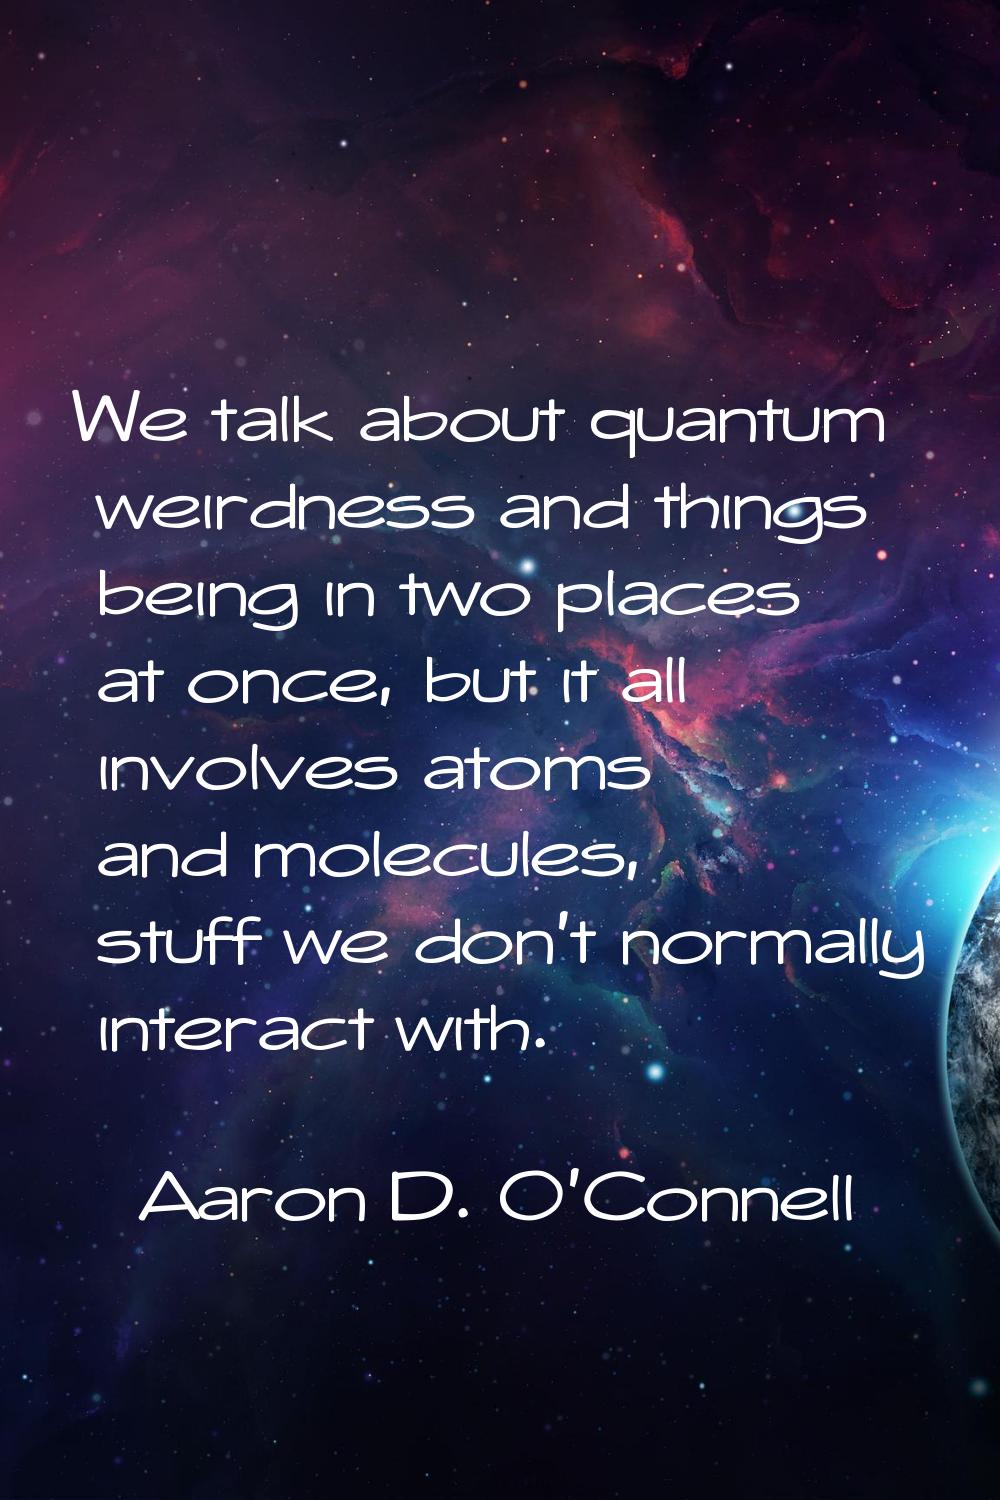 We talk about quantum weirdness and things being in two places at once, but it all involves atoms a